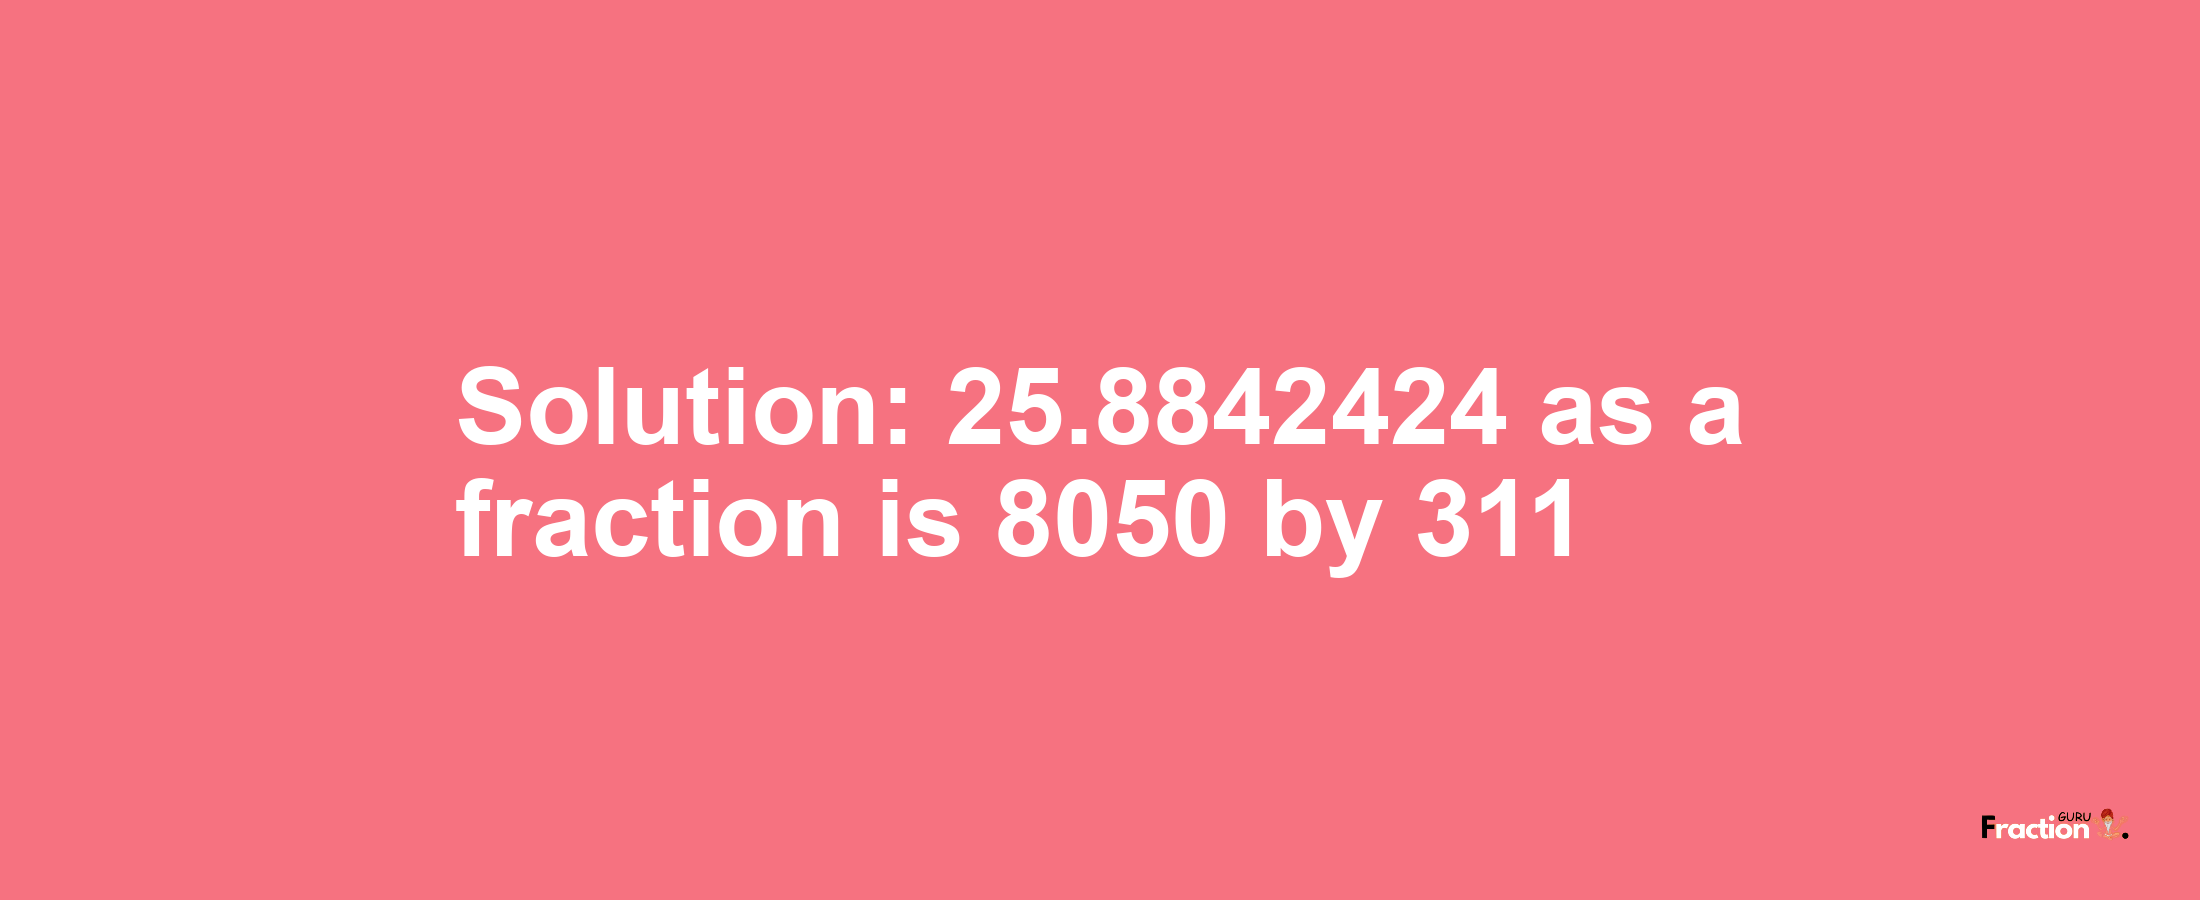 Solution:25.8842424 as a fraction is 8050/311